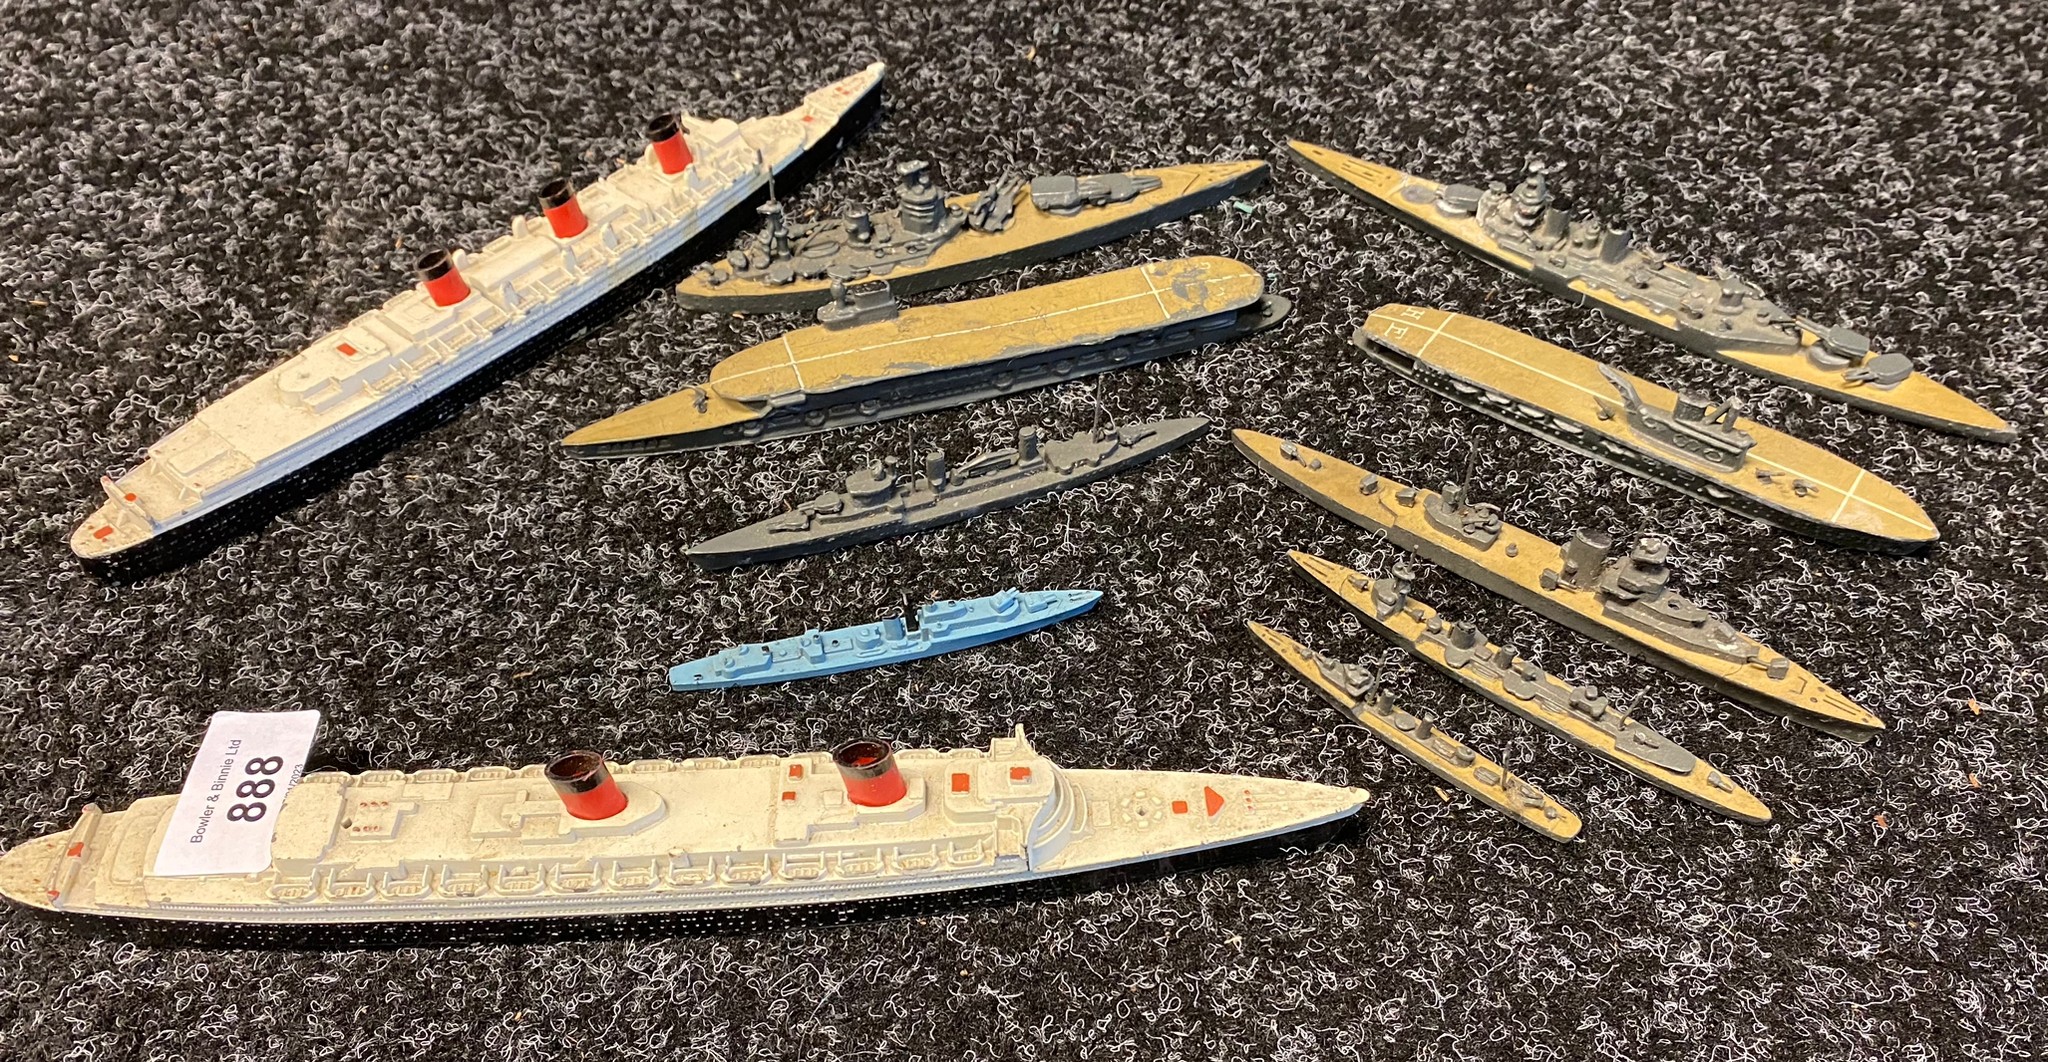 A Collection of British Tri ang mimic ships to include RMS queen Elizabeth and RMS queen Mary .